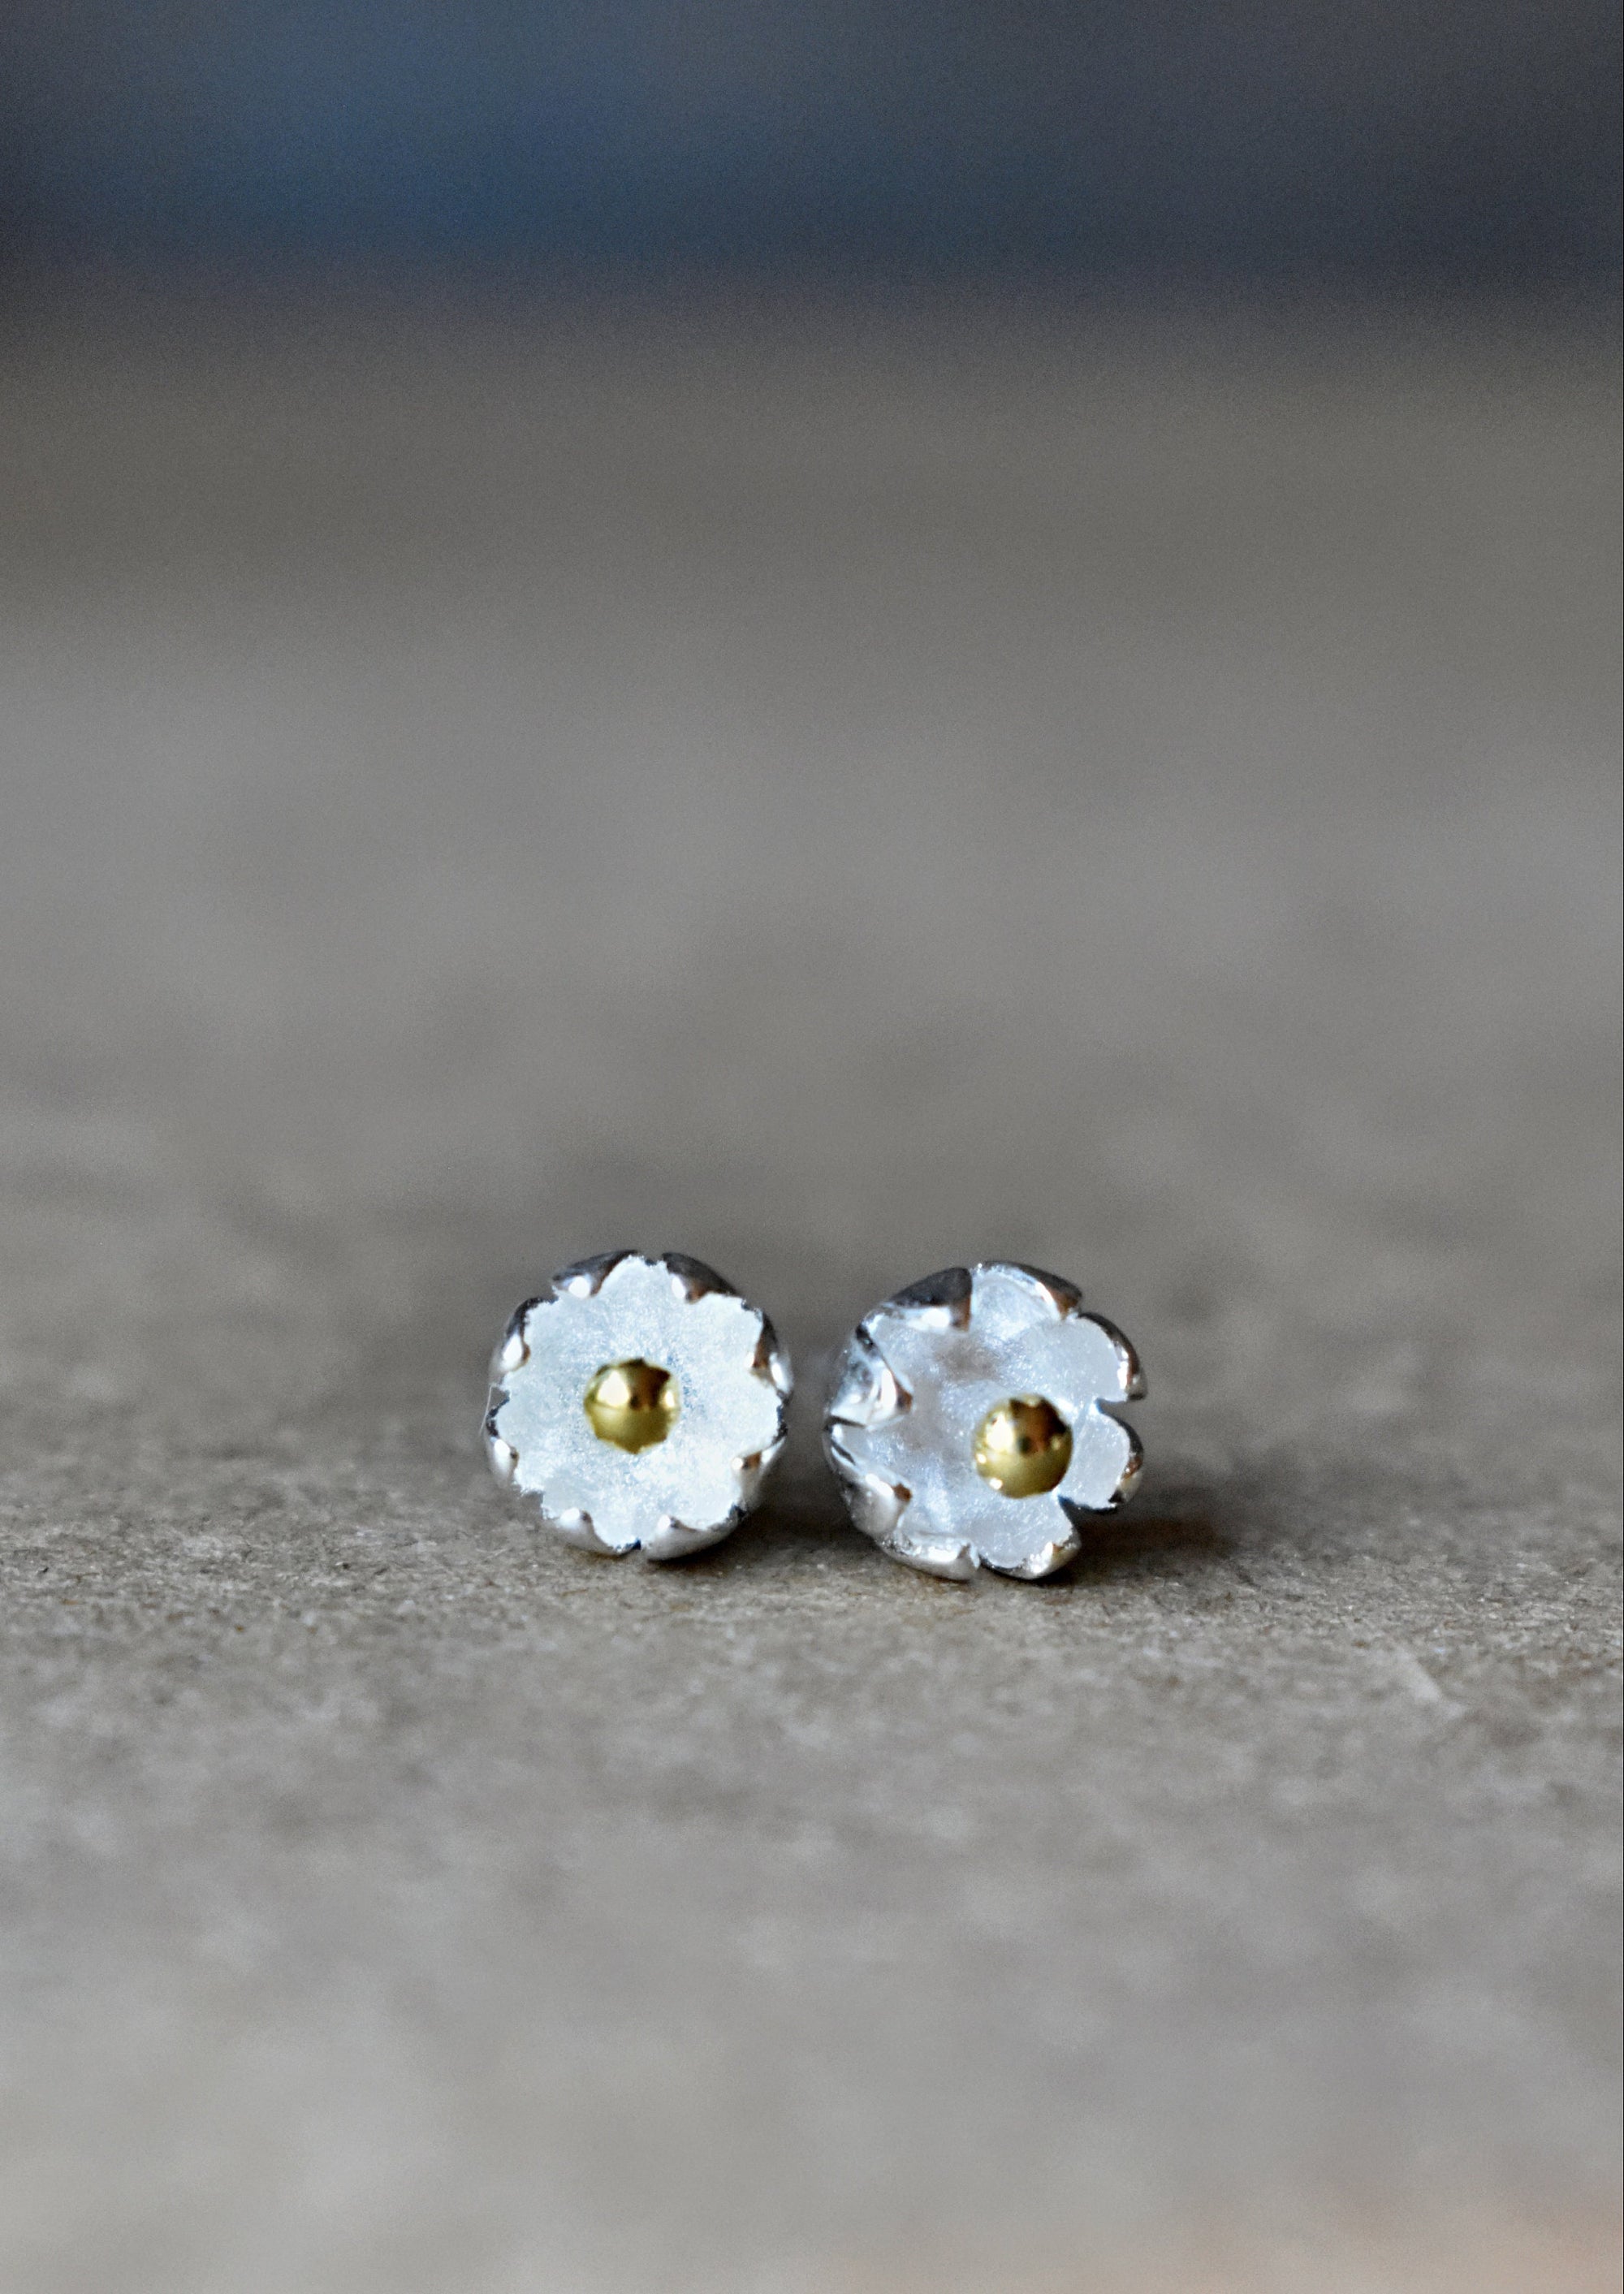 Bright Sterling Silver Tulip Stud Earrings, Mixed Metal Floral Studs in Silver and Gold, Tiny Earlobe Earrings From Gemologies